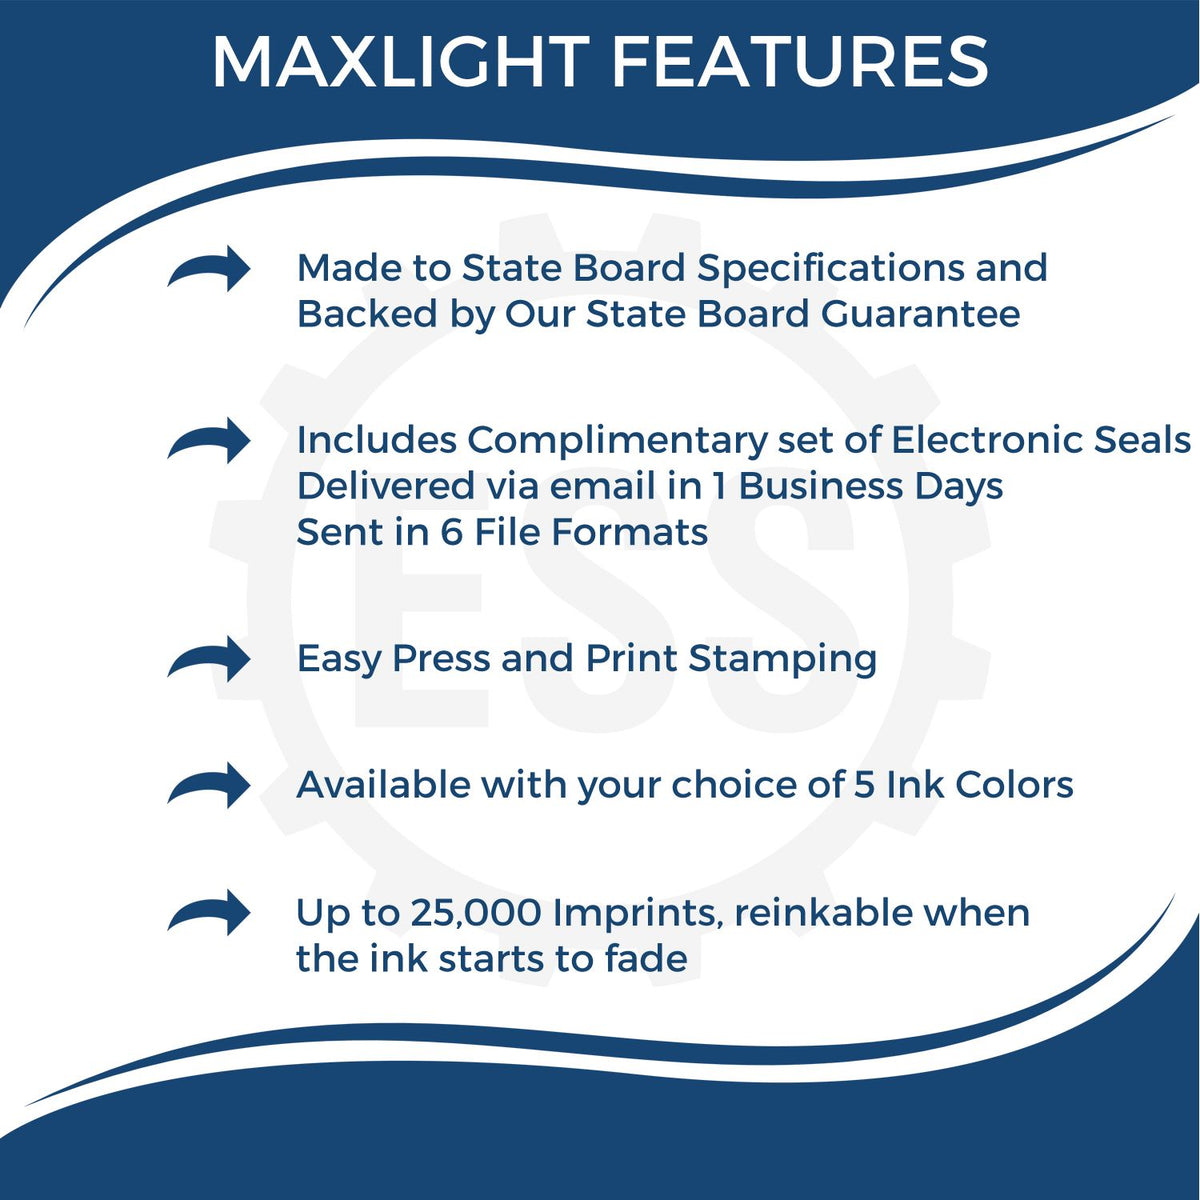 A picture of an infographic highlighting the selling points for the Premium MaxLight Pre-Inked South Dakota Landscape Architectural Stamp